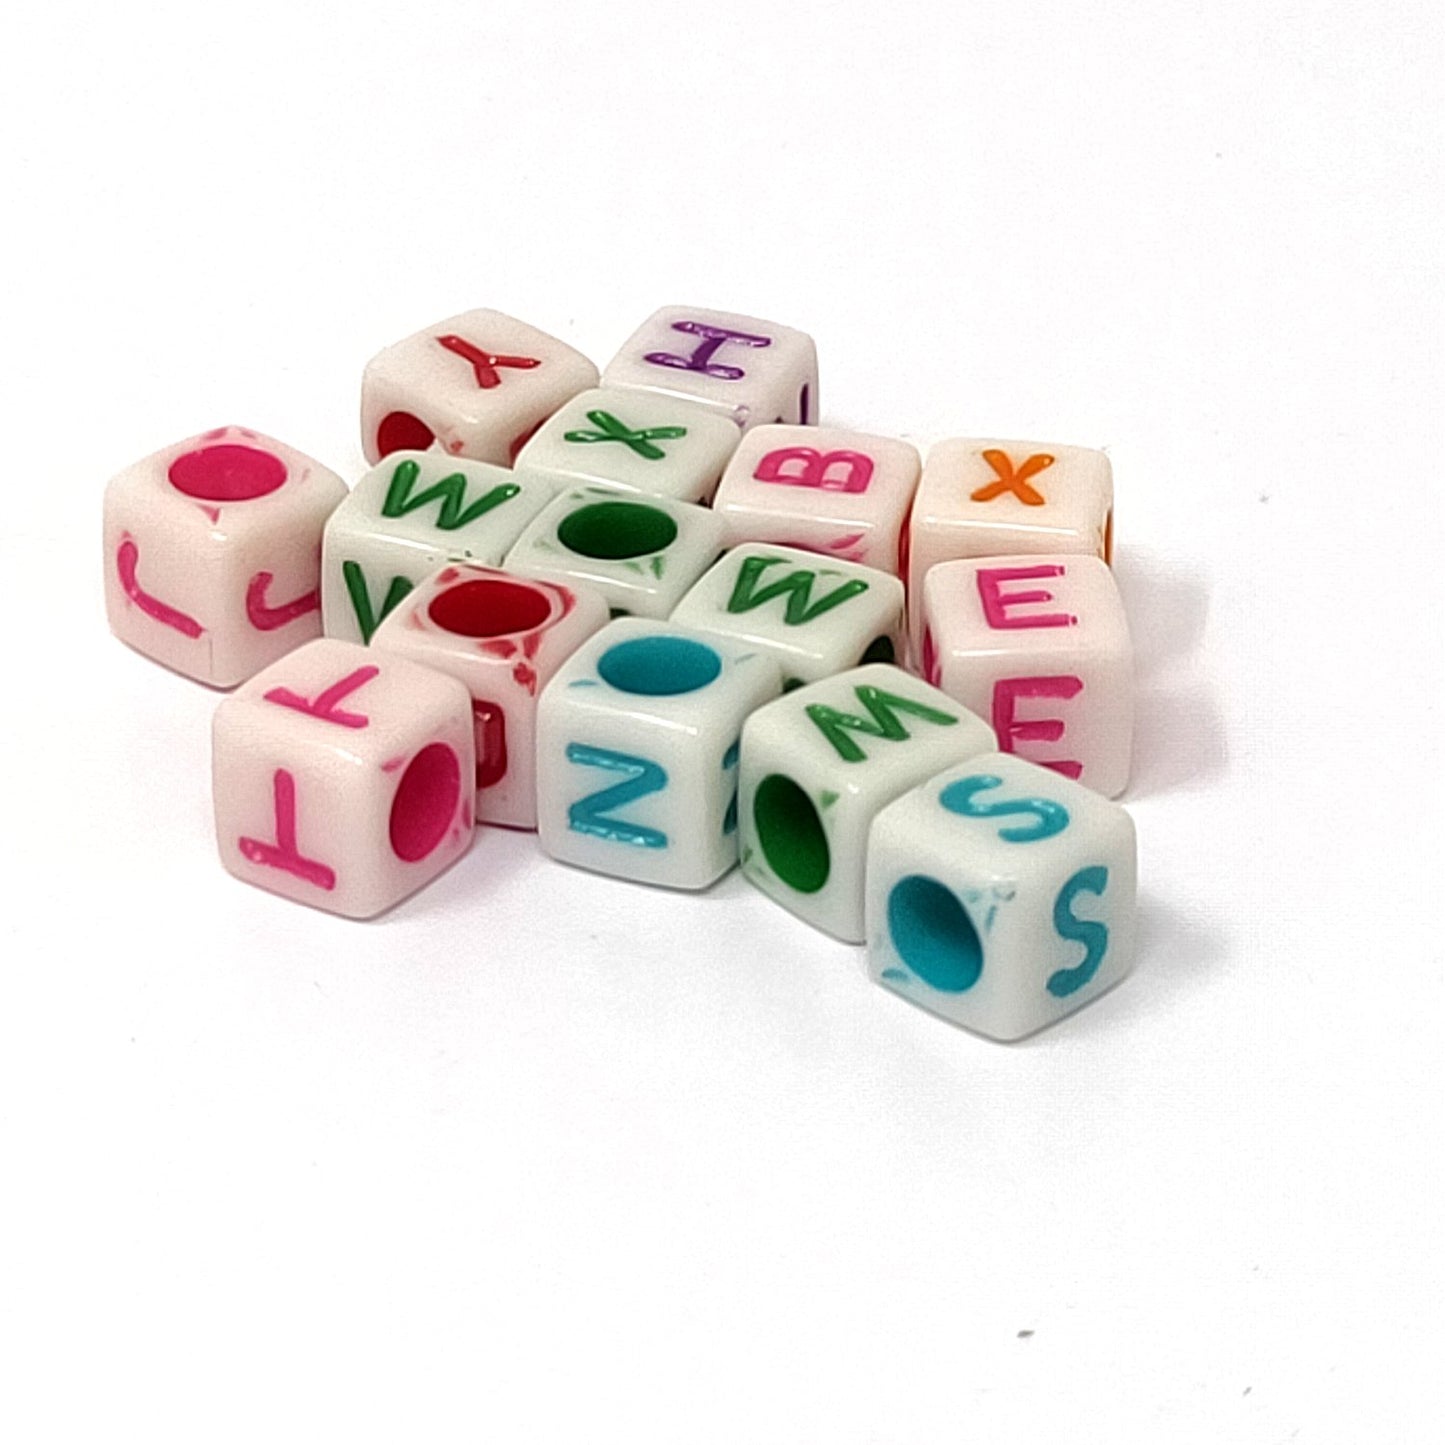 5 mm Plastic Alphabetic Cube Beads for Jewellery Making and Decoration (100 Beads) - 96-08